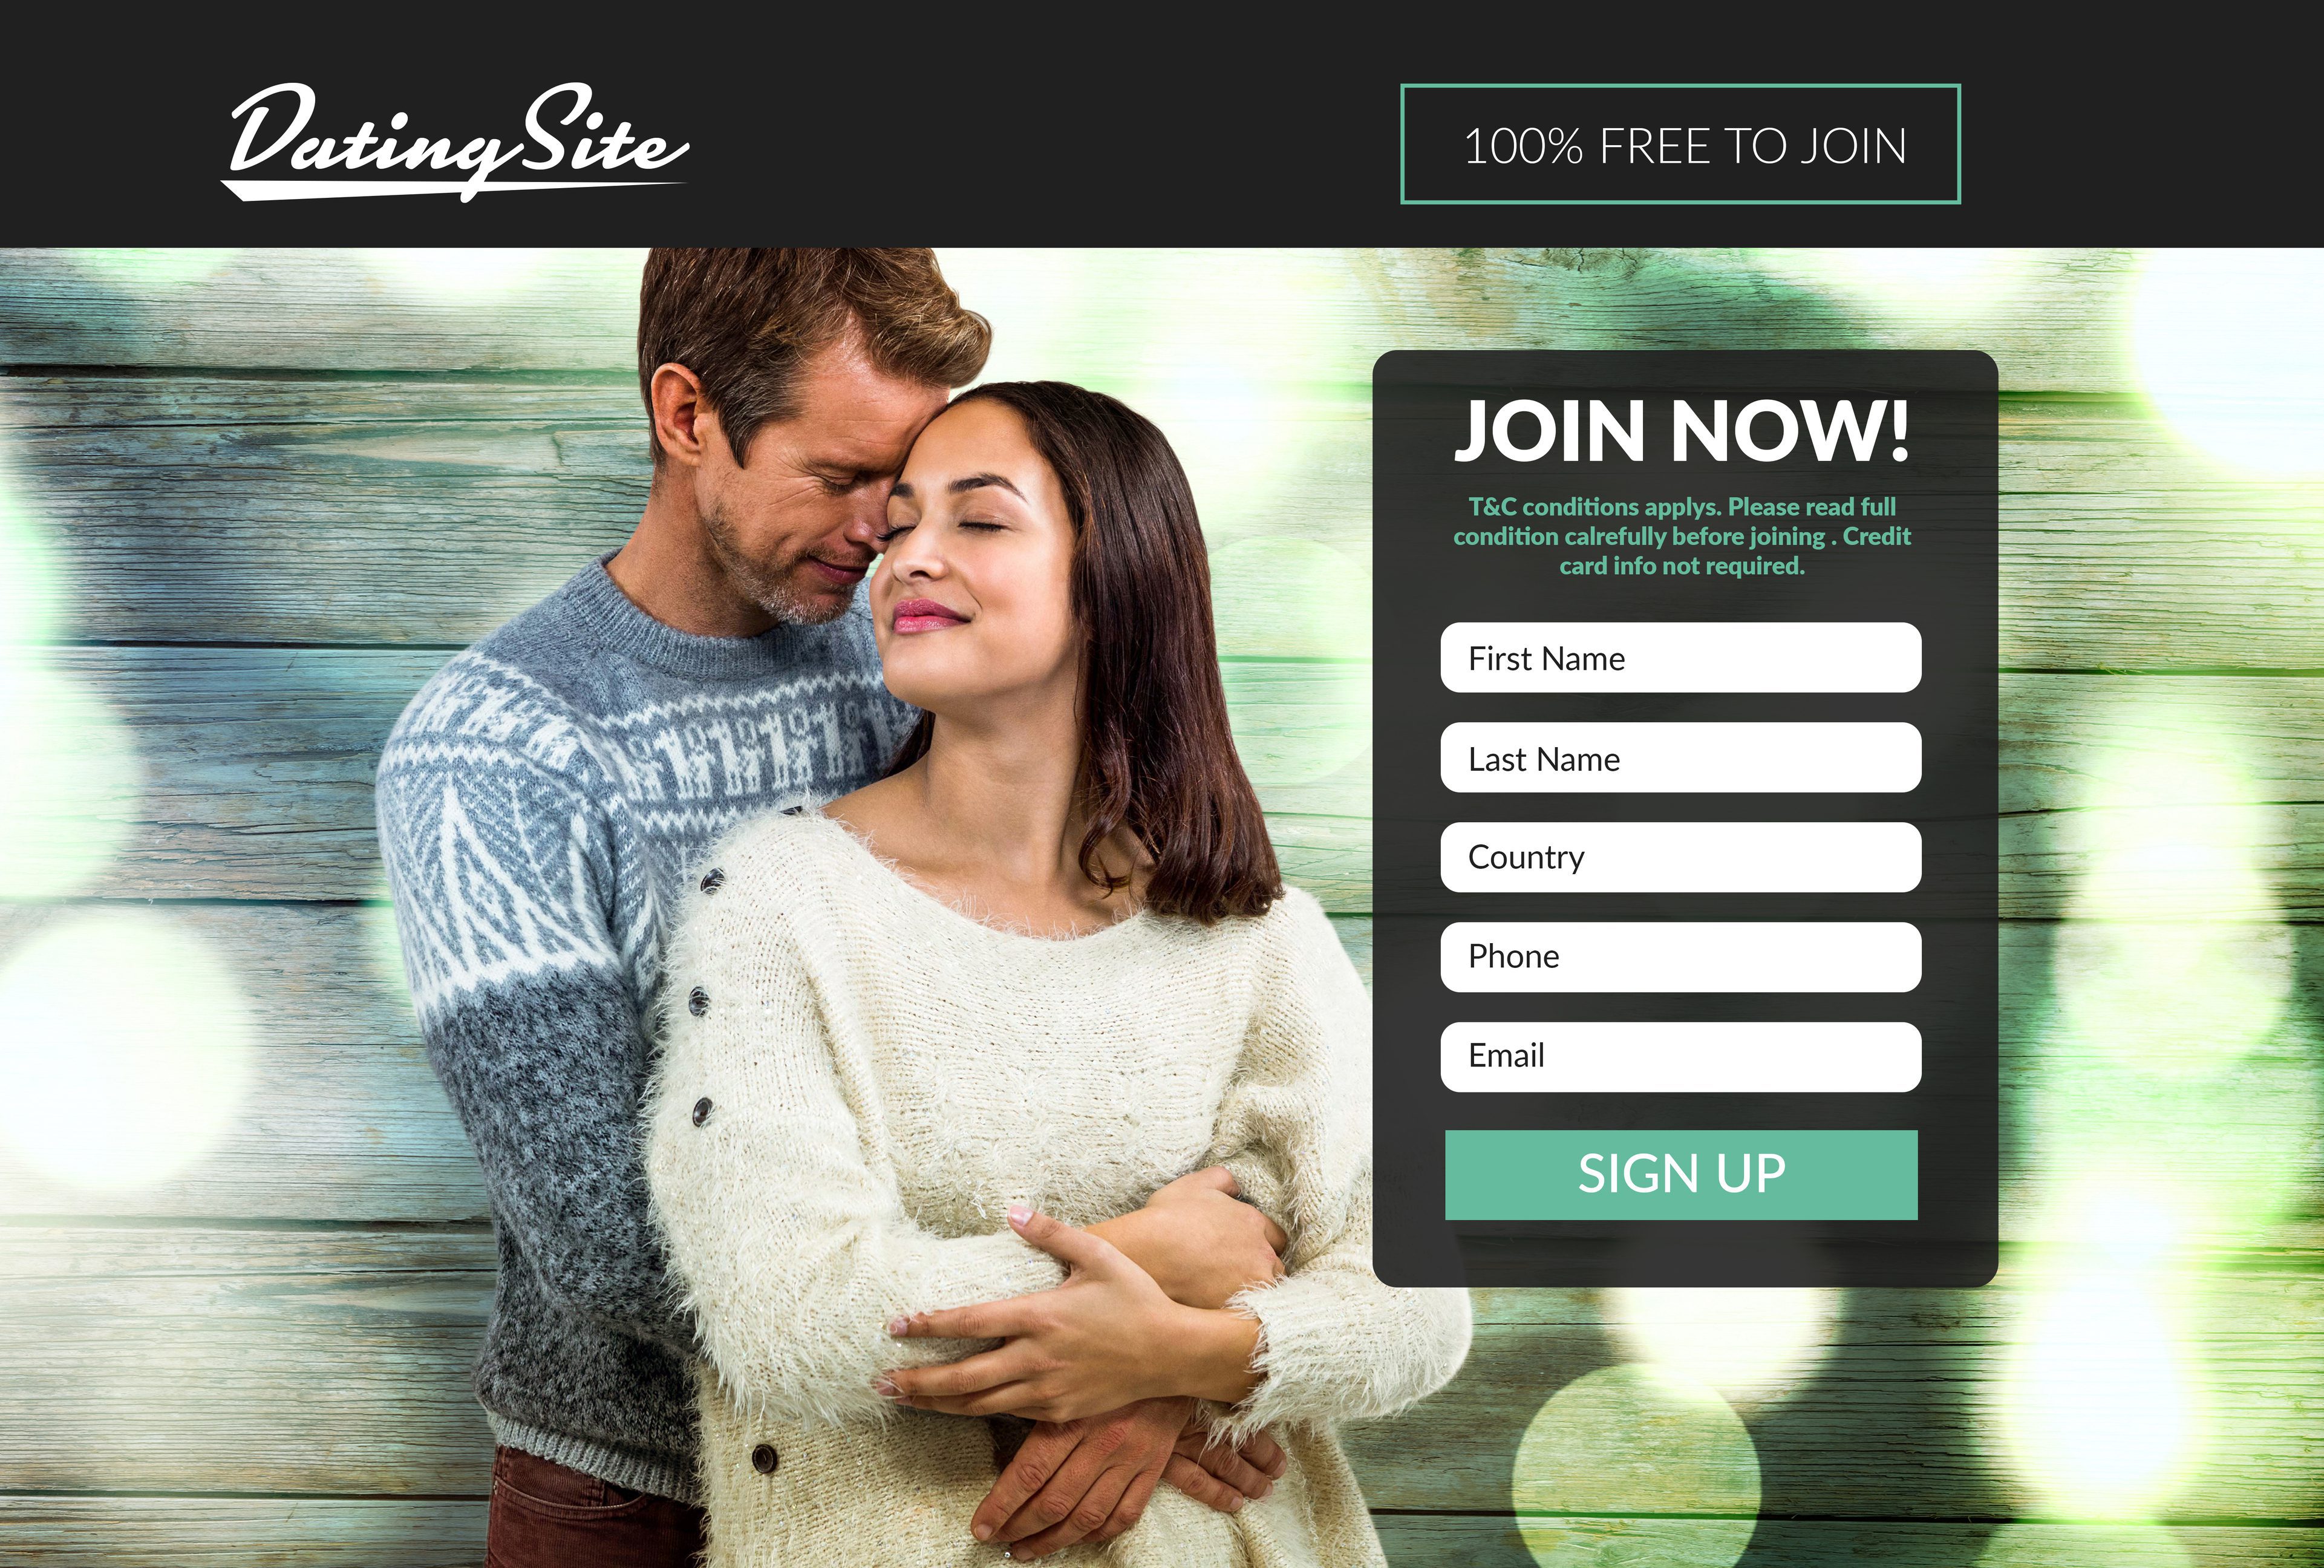 Do You Think Online Dating Sites Are A Good Replacement For Going Out And Finding The One?